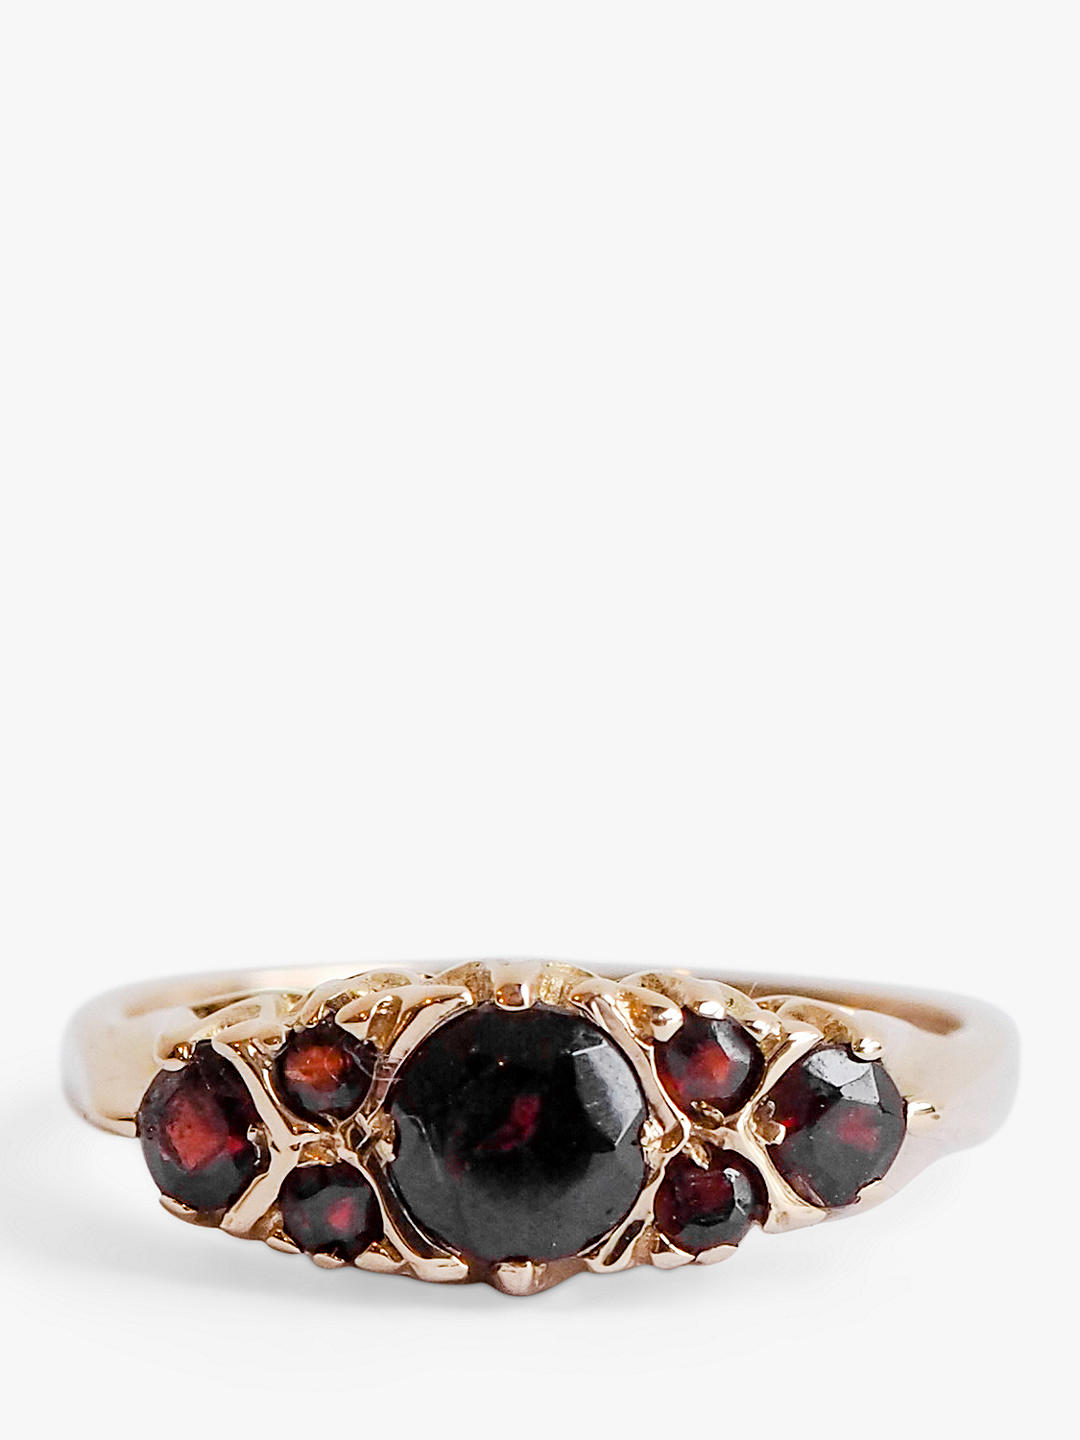 L & T Heirlooms Second Hand 9ct Yellow Gold Garnet Ring, Dated Circa 1975